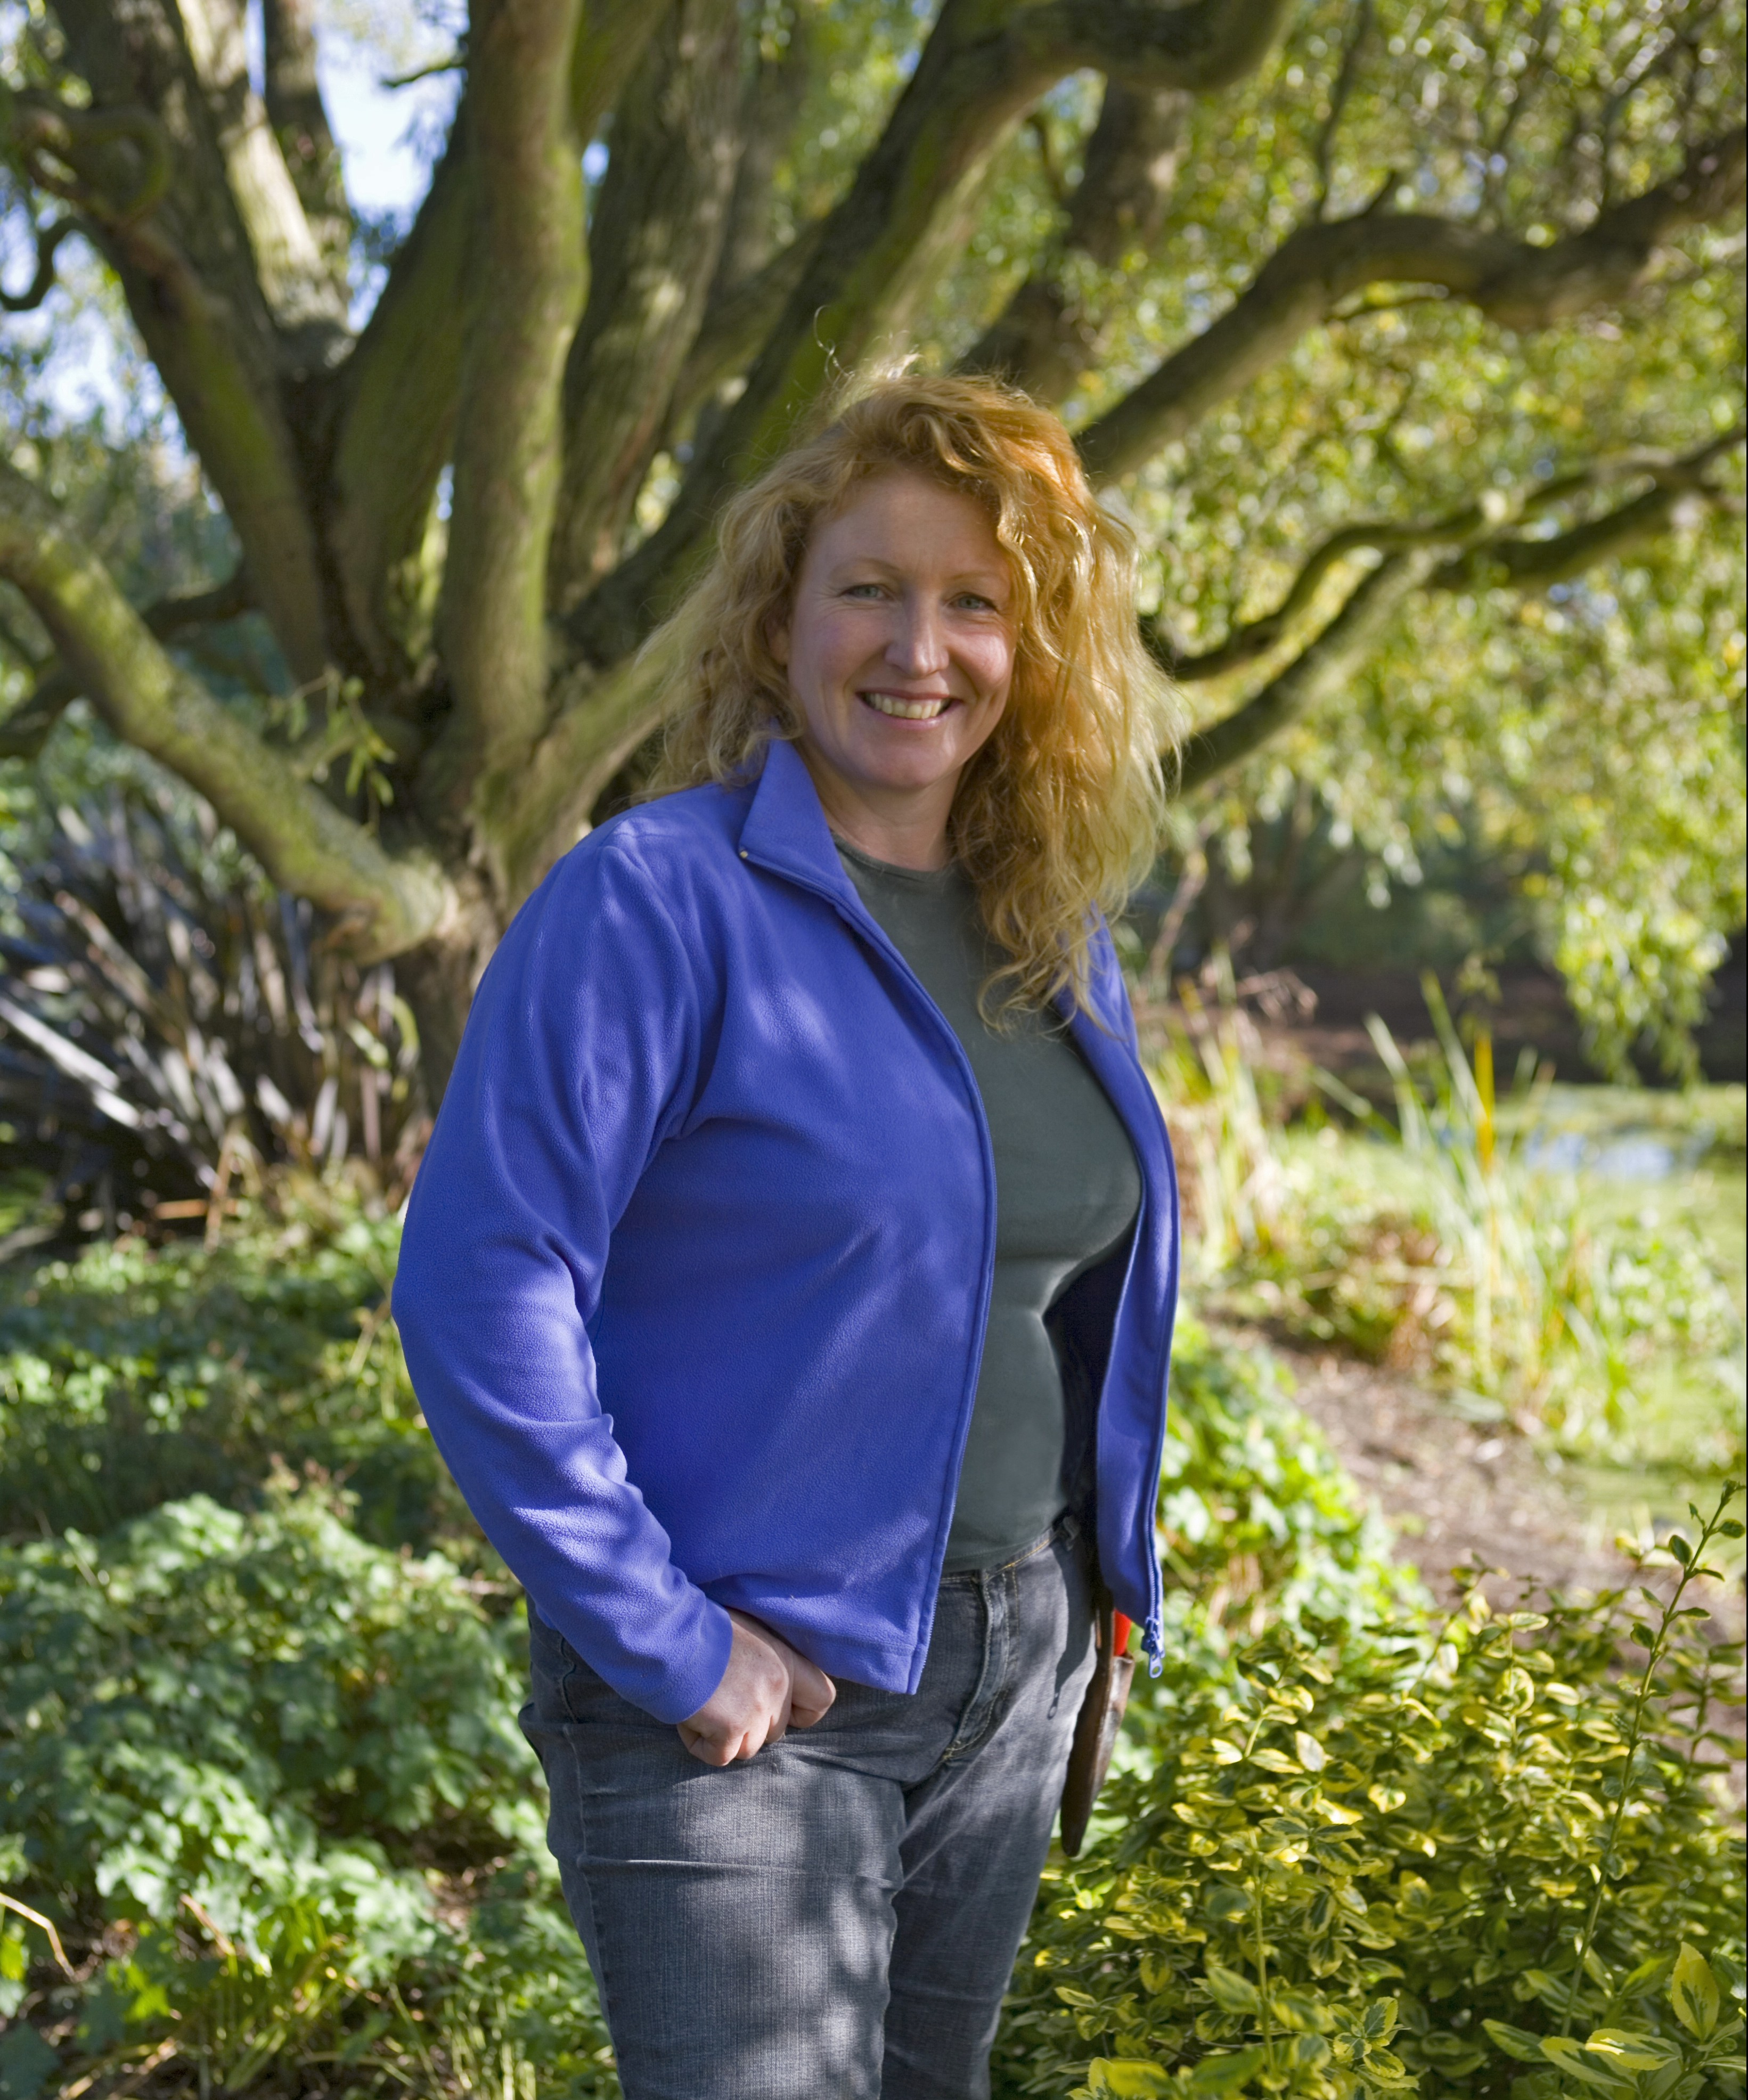 Charlie Dimmock Grow yourself a good impression